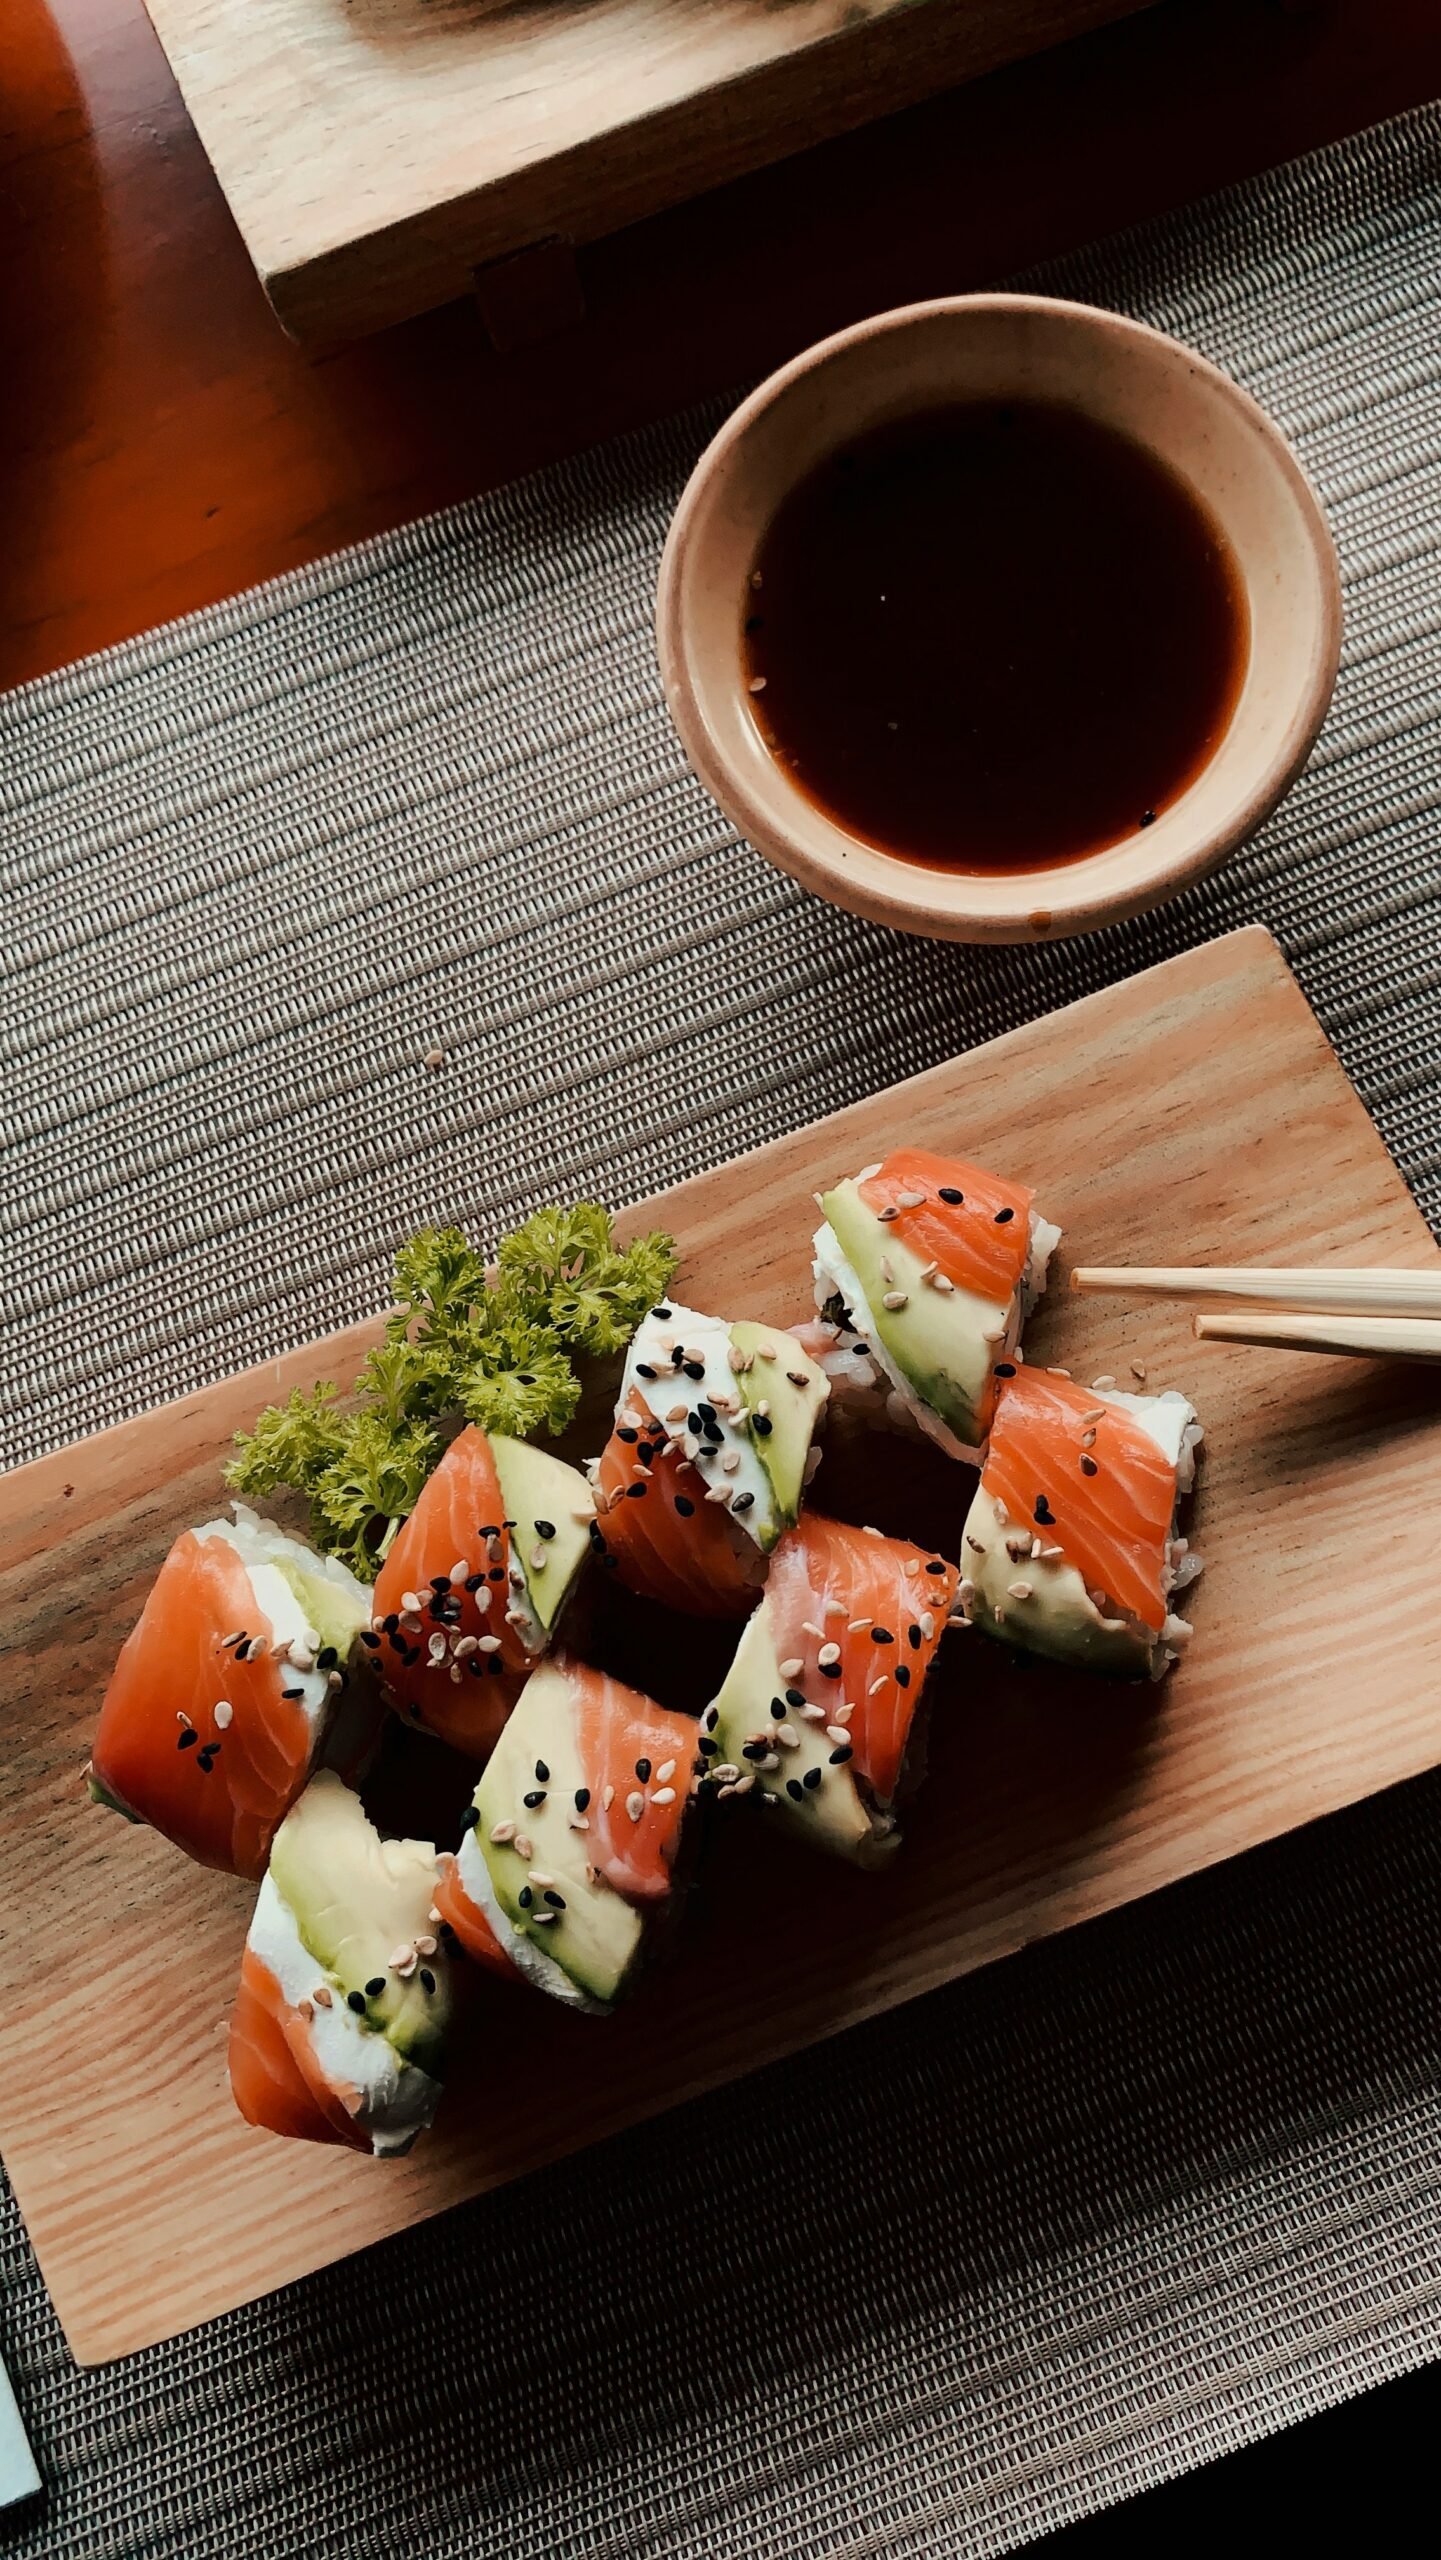 All You Can Eat Sushi: Indulge in Endless Sushi Delights